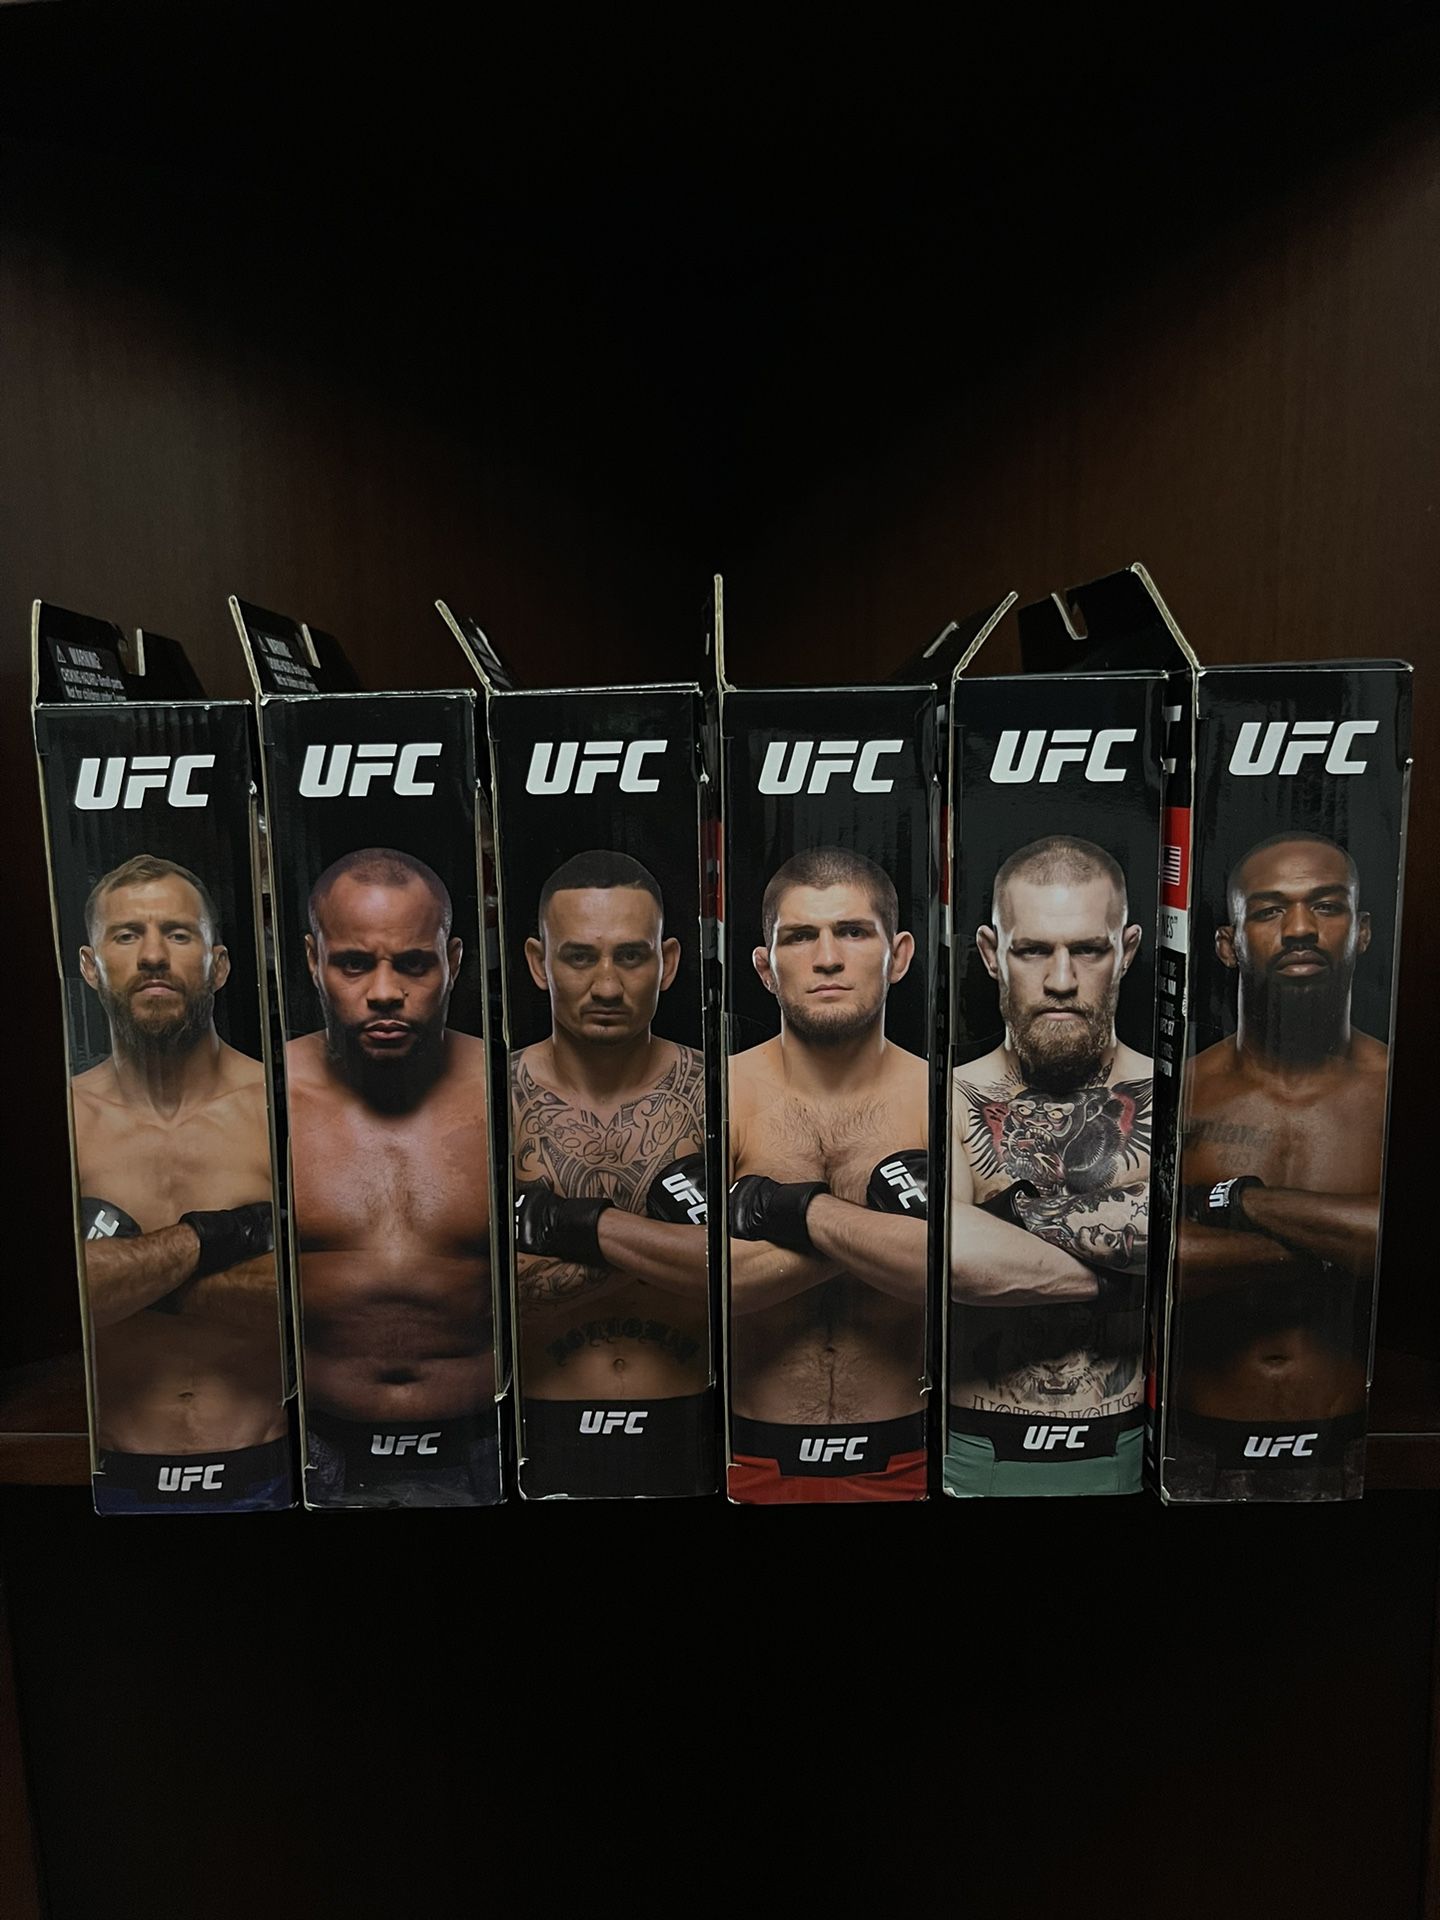 UFC COLLECTION 2020 Limited Series